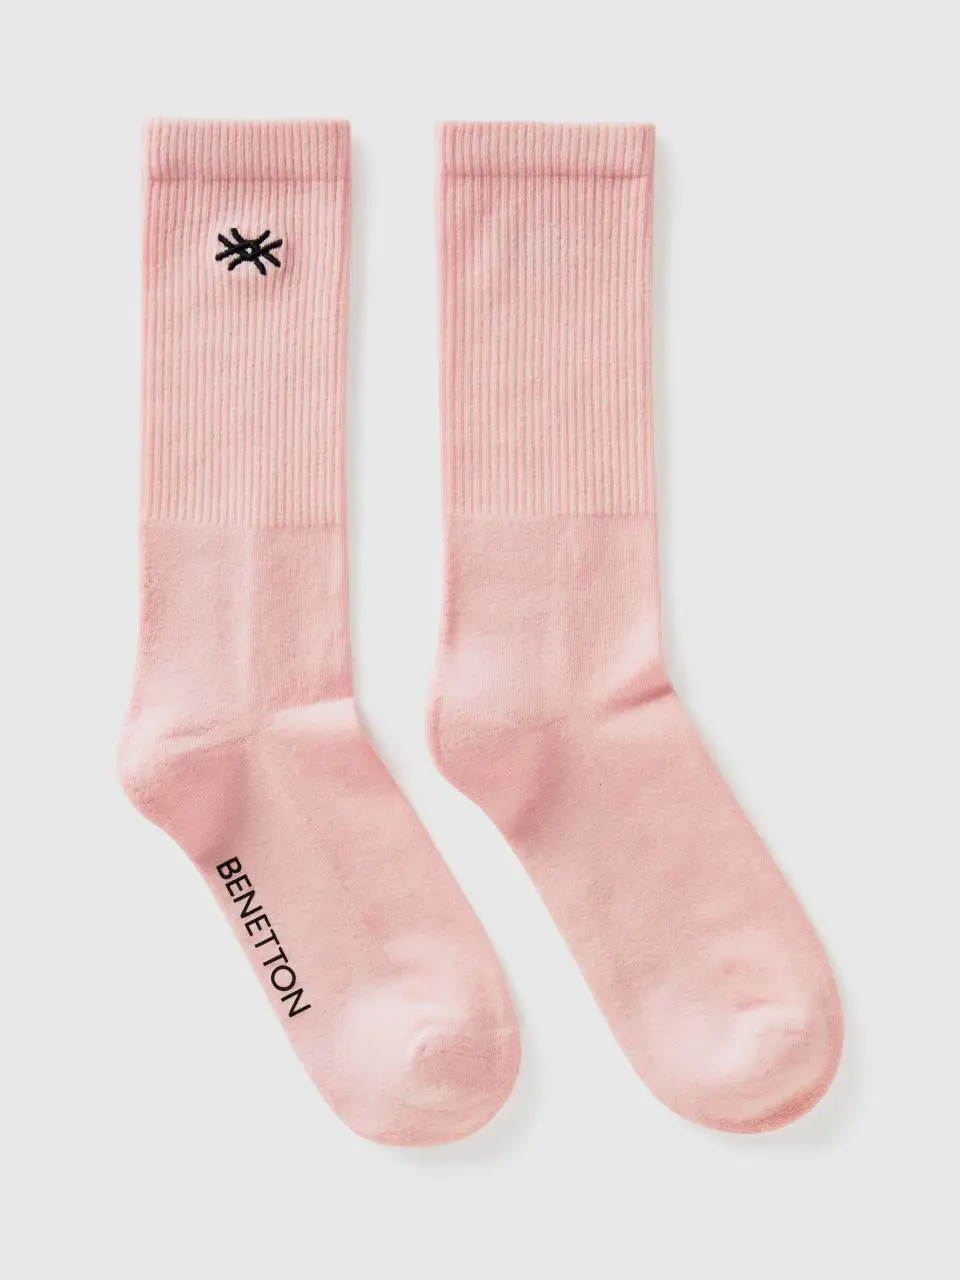 Benetton socks with embroidered logo. 1